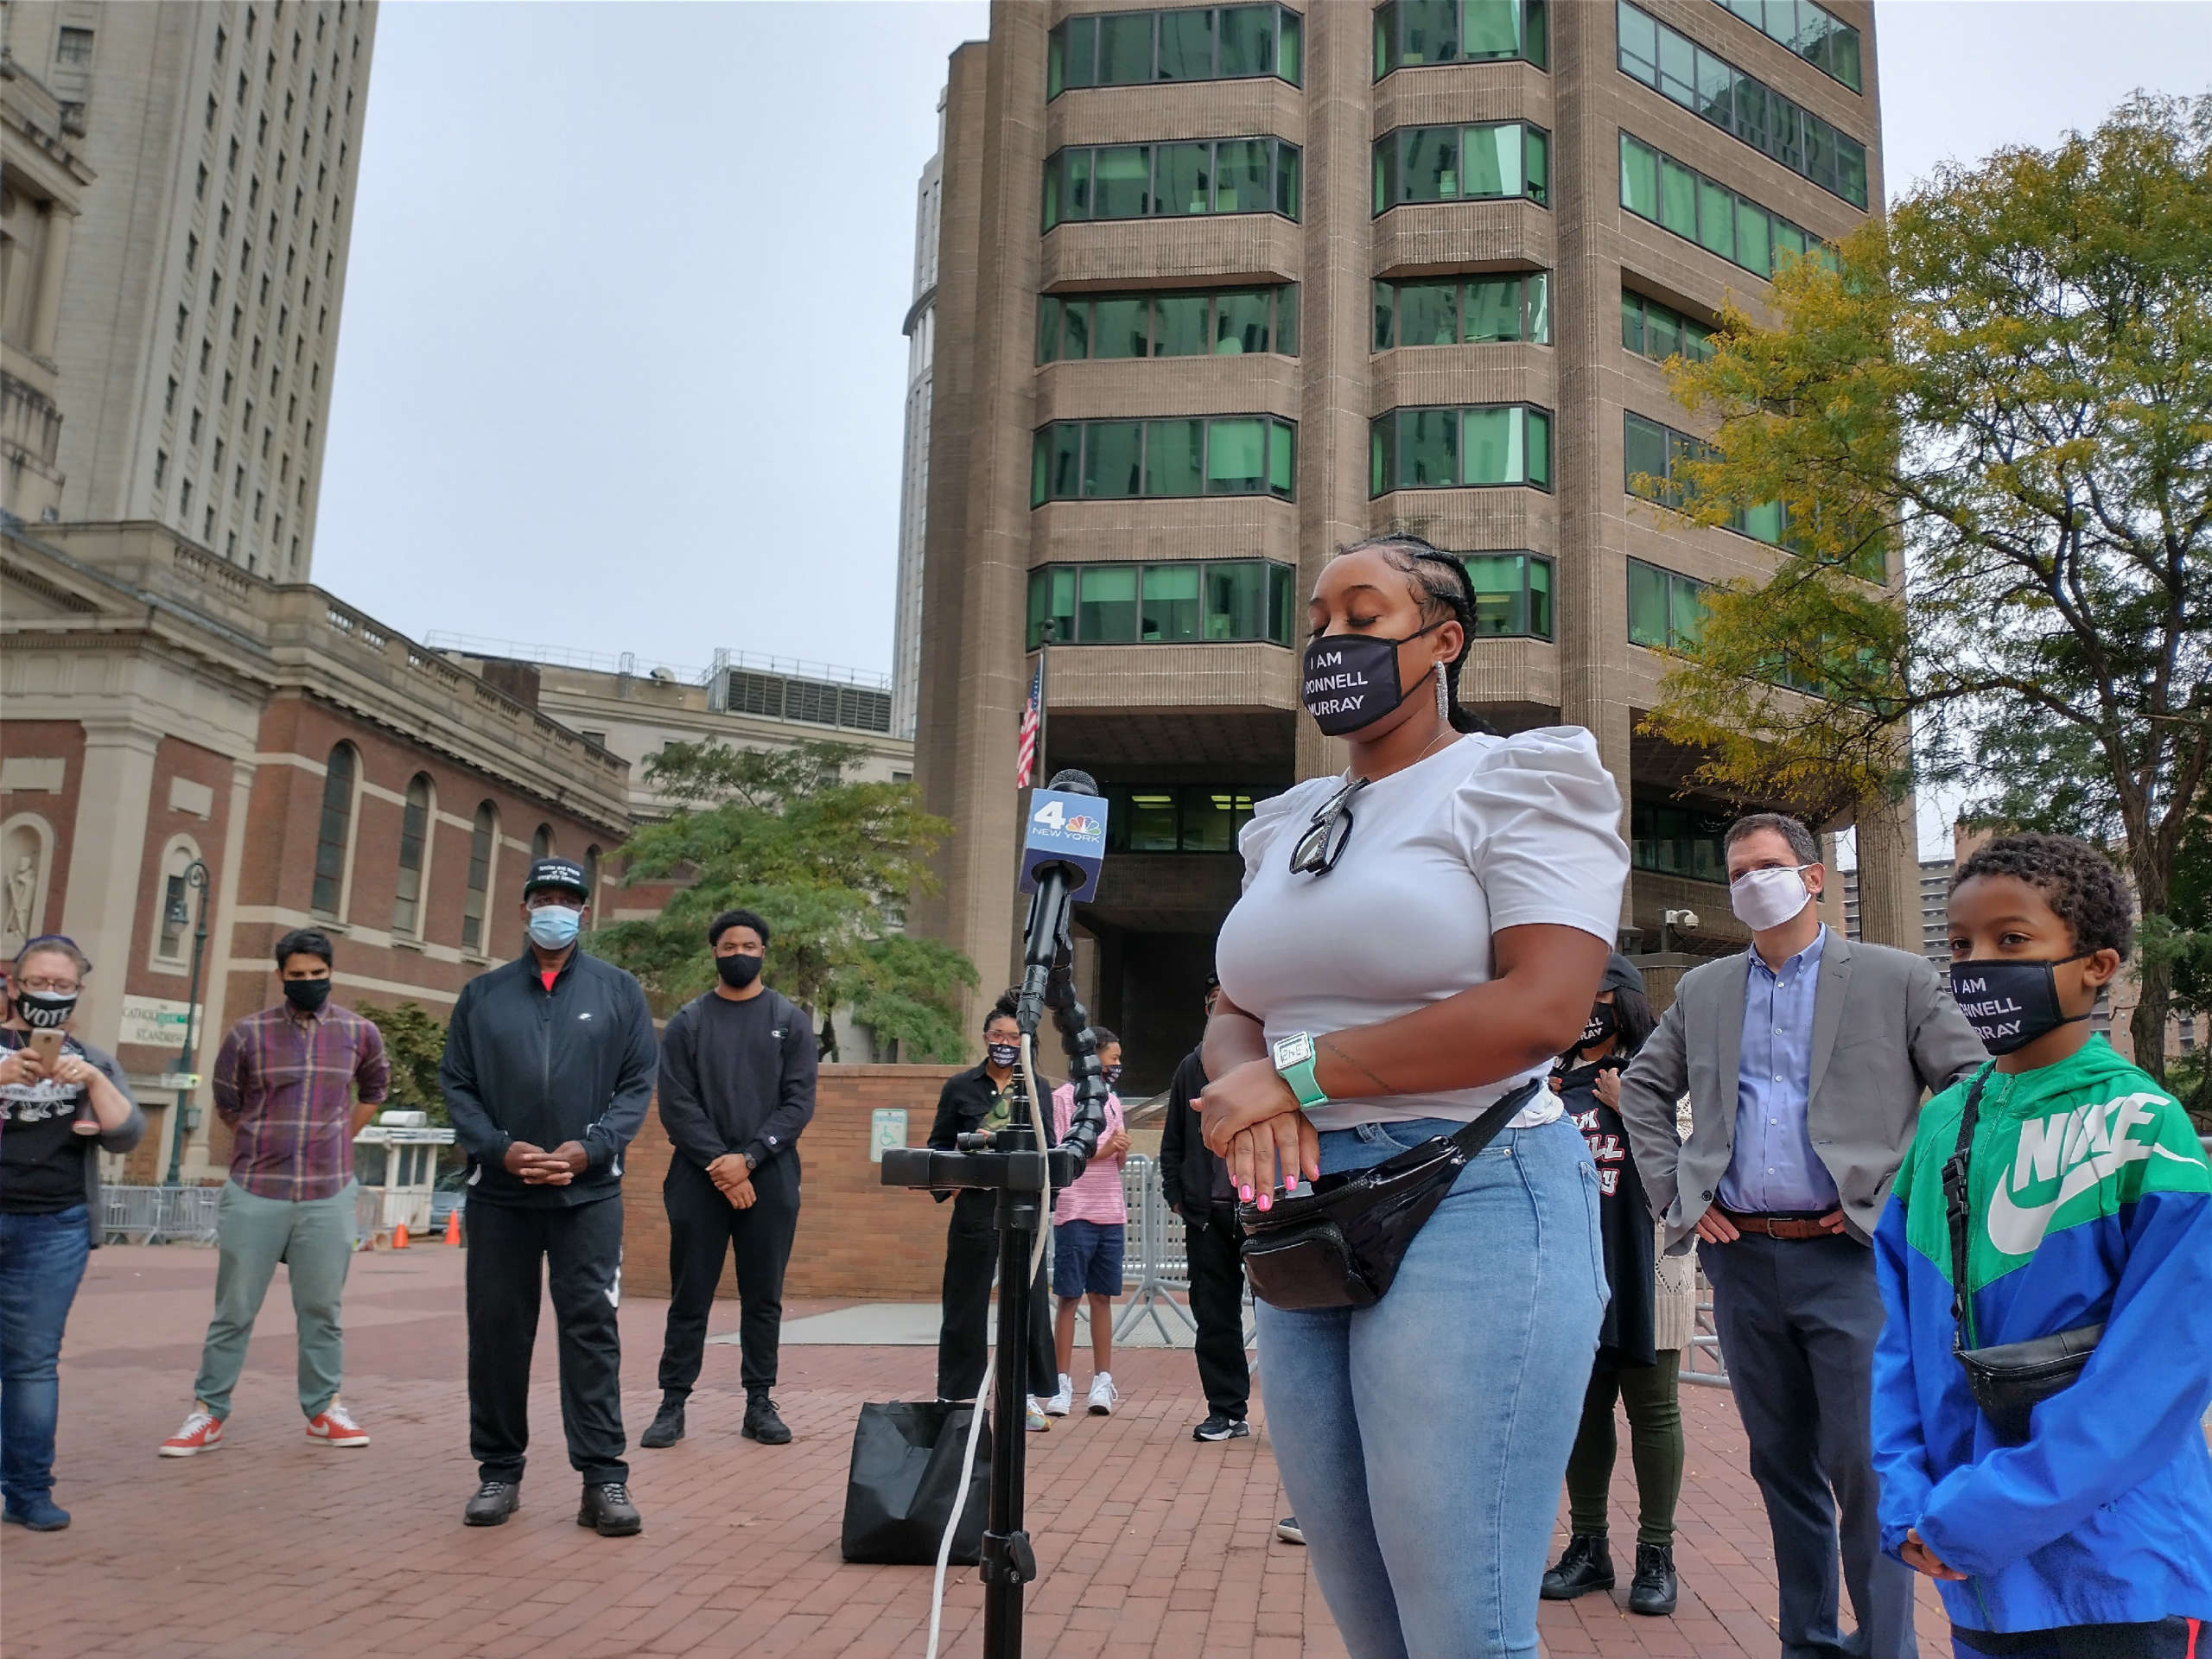 Donnell Murray's fiancé, Destinee Ferguson, speaking at a protest outside the U.S. Attorney's Southern District Offices, October 2020.